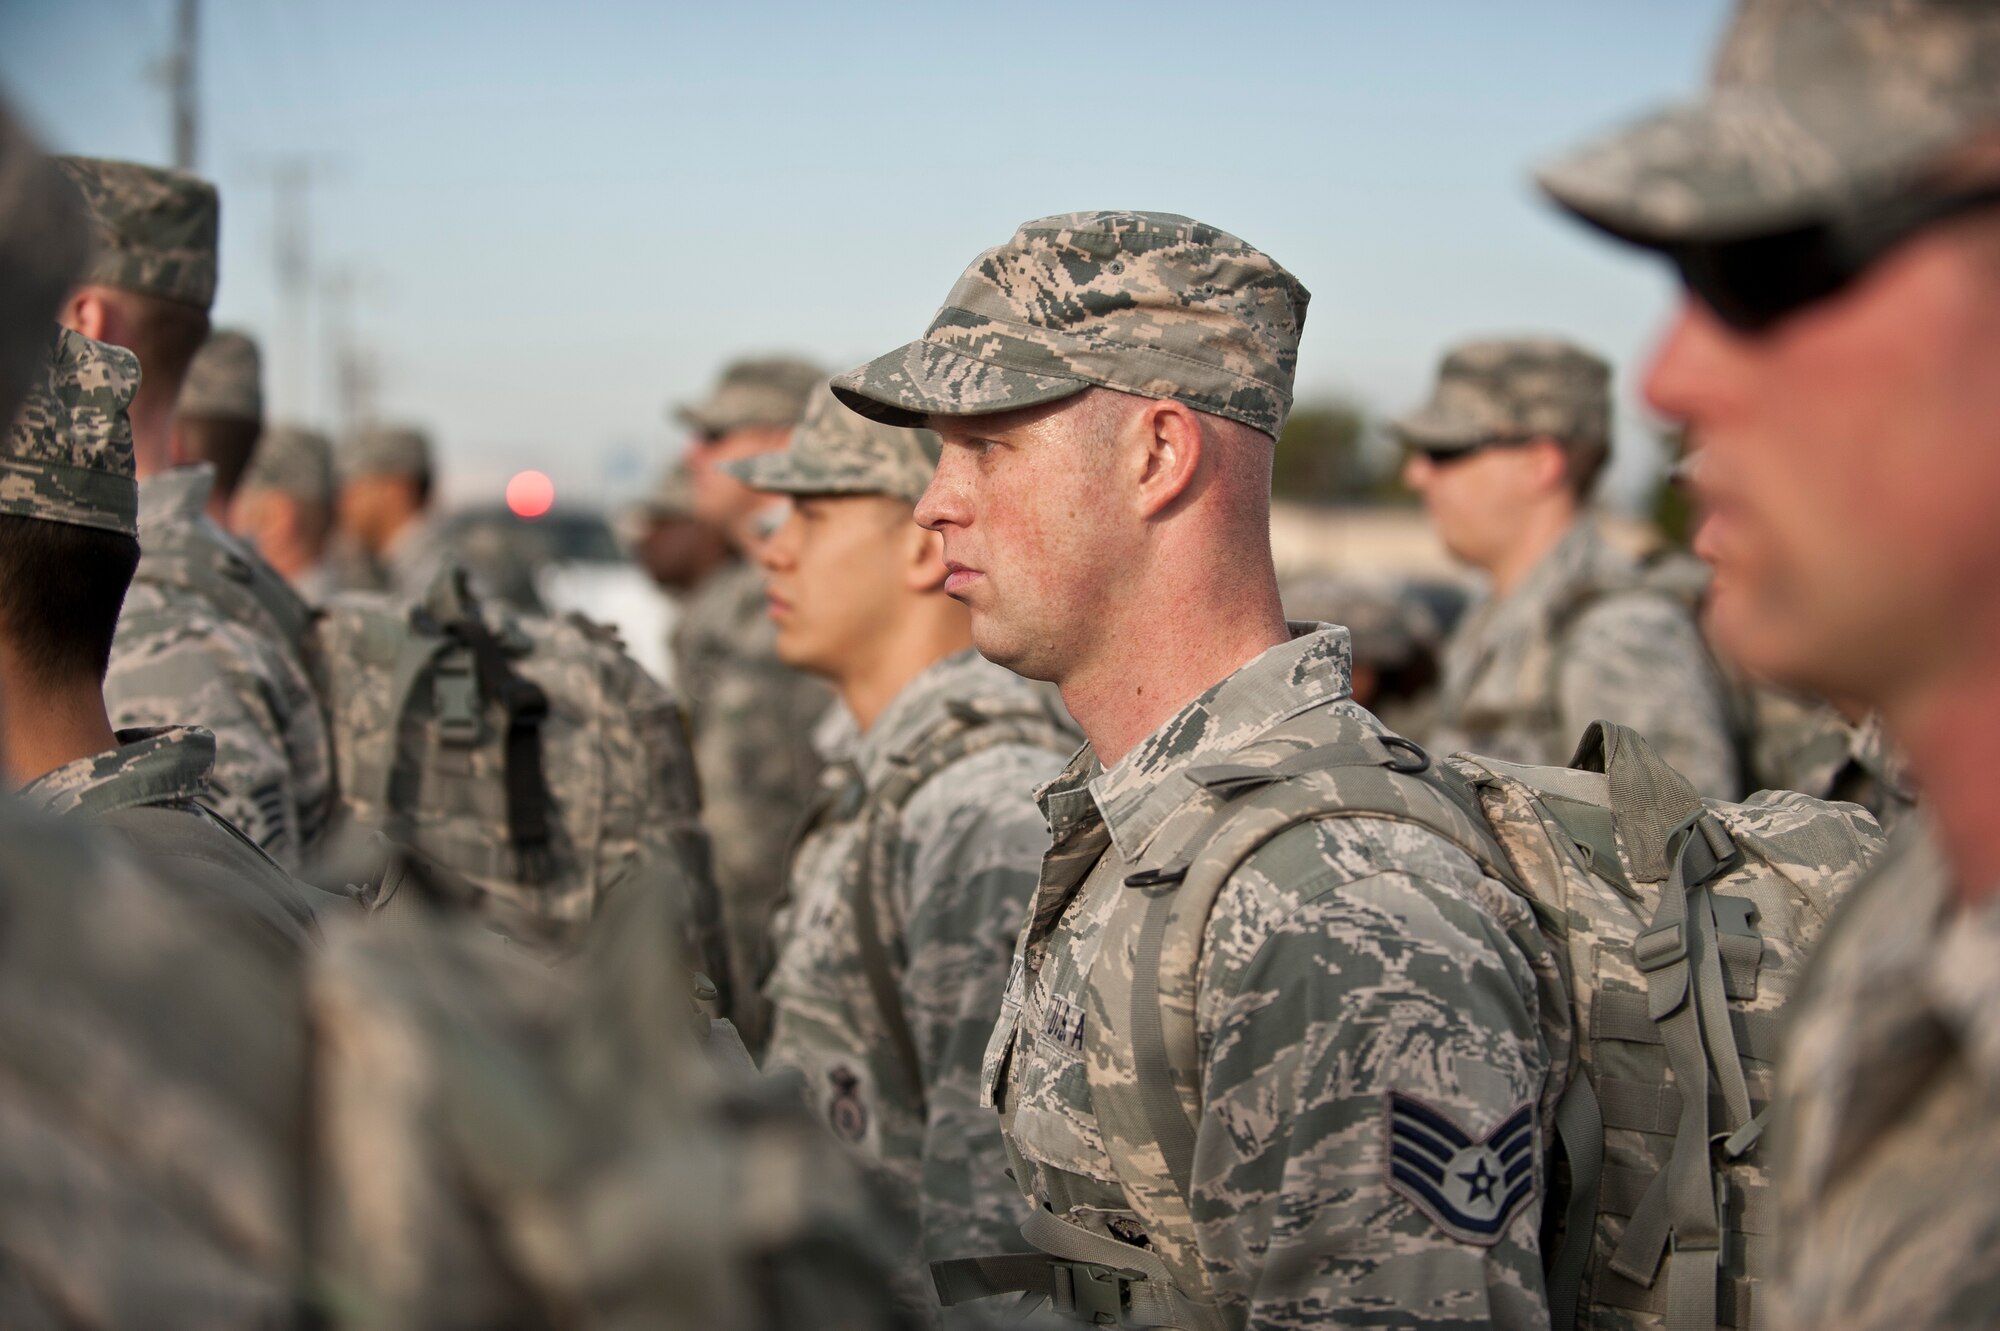 Airmen assigned to the 99th Security Forces Squadron stand in formation during a 10K memorial ruck march for National Police Week at Nellis Air Force Base, Nev., May 13, 2015. The event was held to commemorate National Police Week, and honor fallen Air Force security forces members. (U.S. Air Force photo by Staff Sgt. Siuta B. Ika)